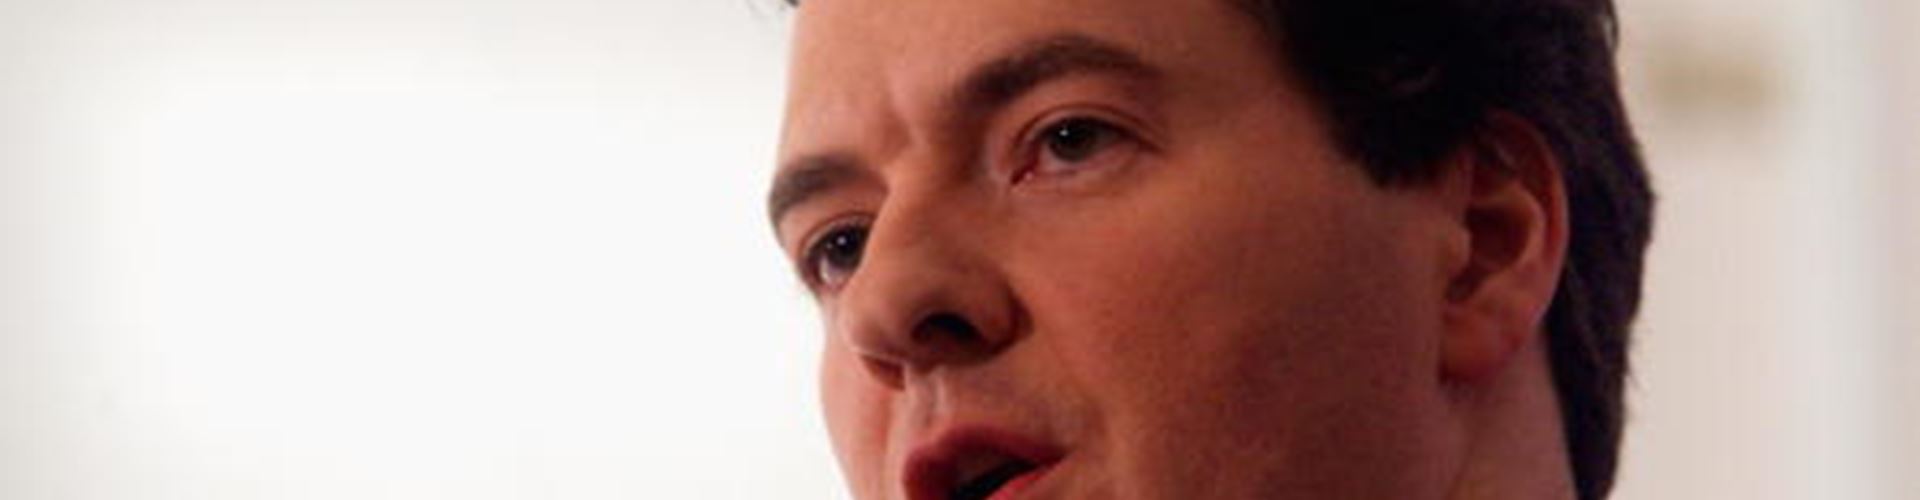 George Osborne wants to ban deficits in UK budgets